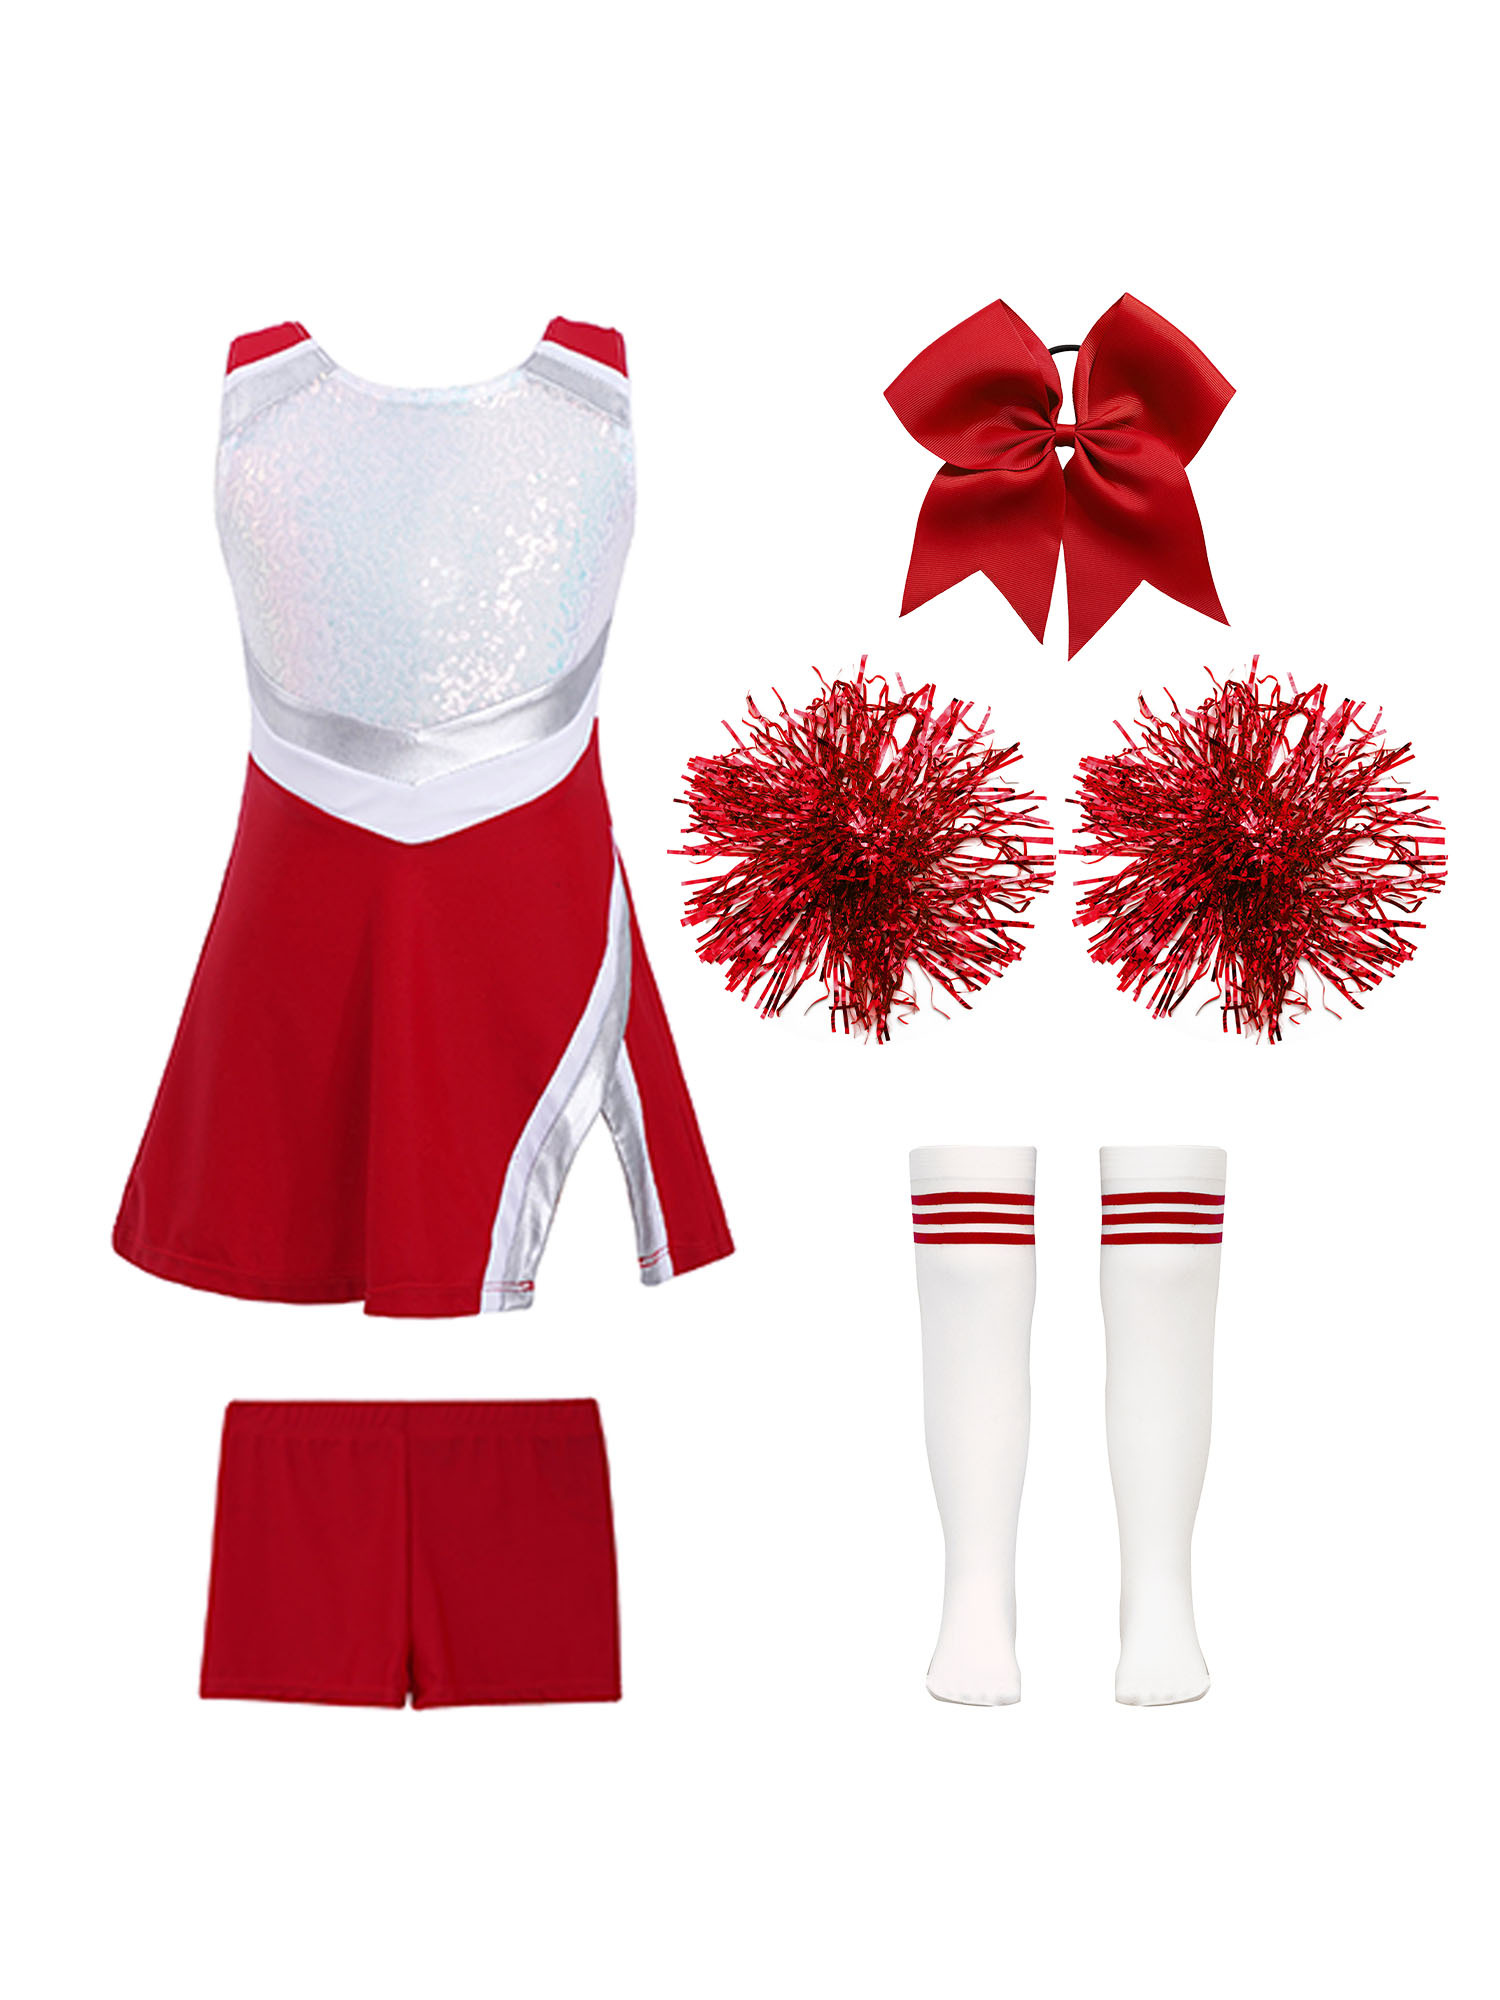 TiaoBug Kids Girls Cheer Leader Uniform Sports Games Cheerleading Dance Outfits Halloween Carnival Fancy Dress Up B Red 8 - image 1 of 5